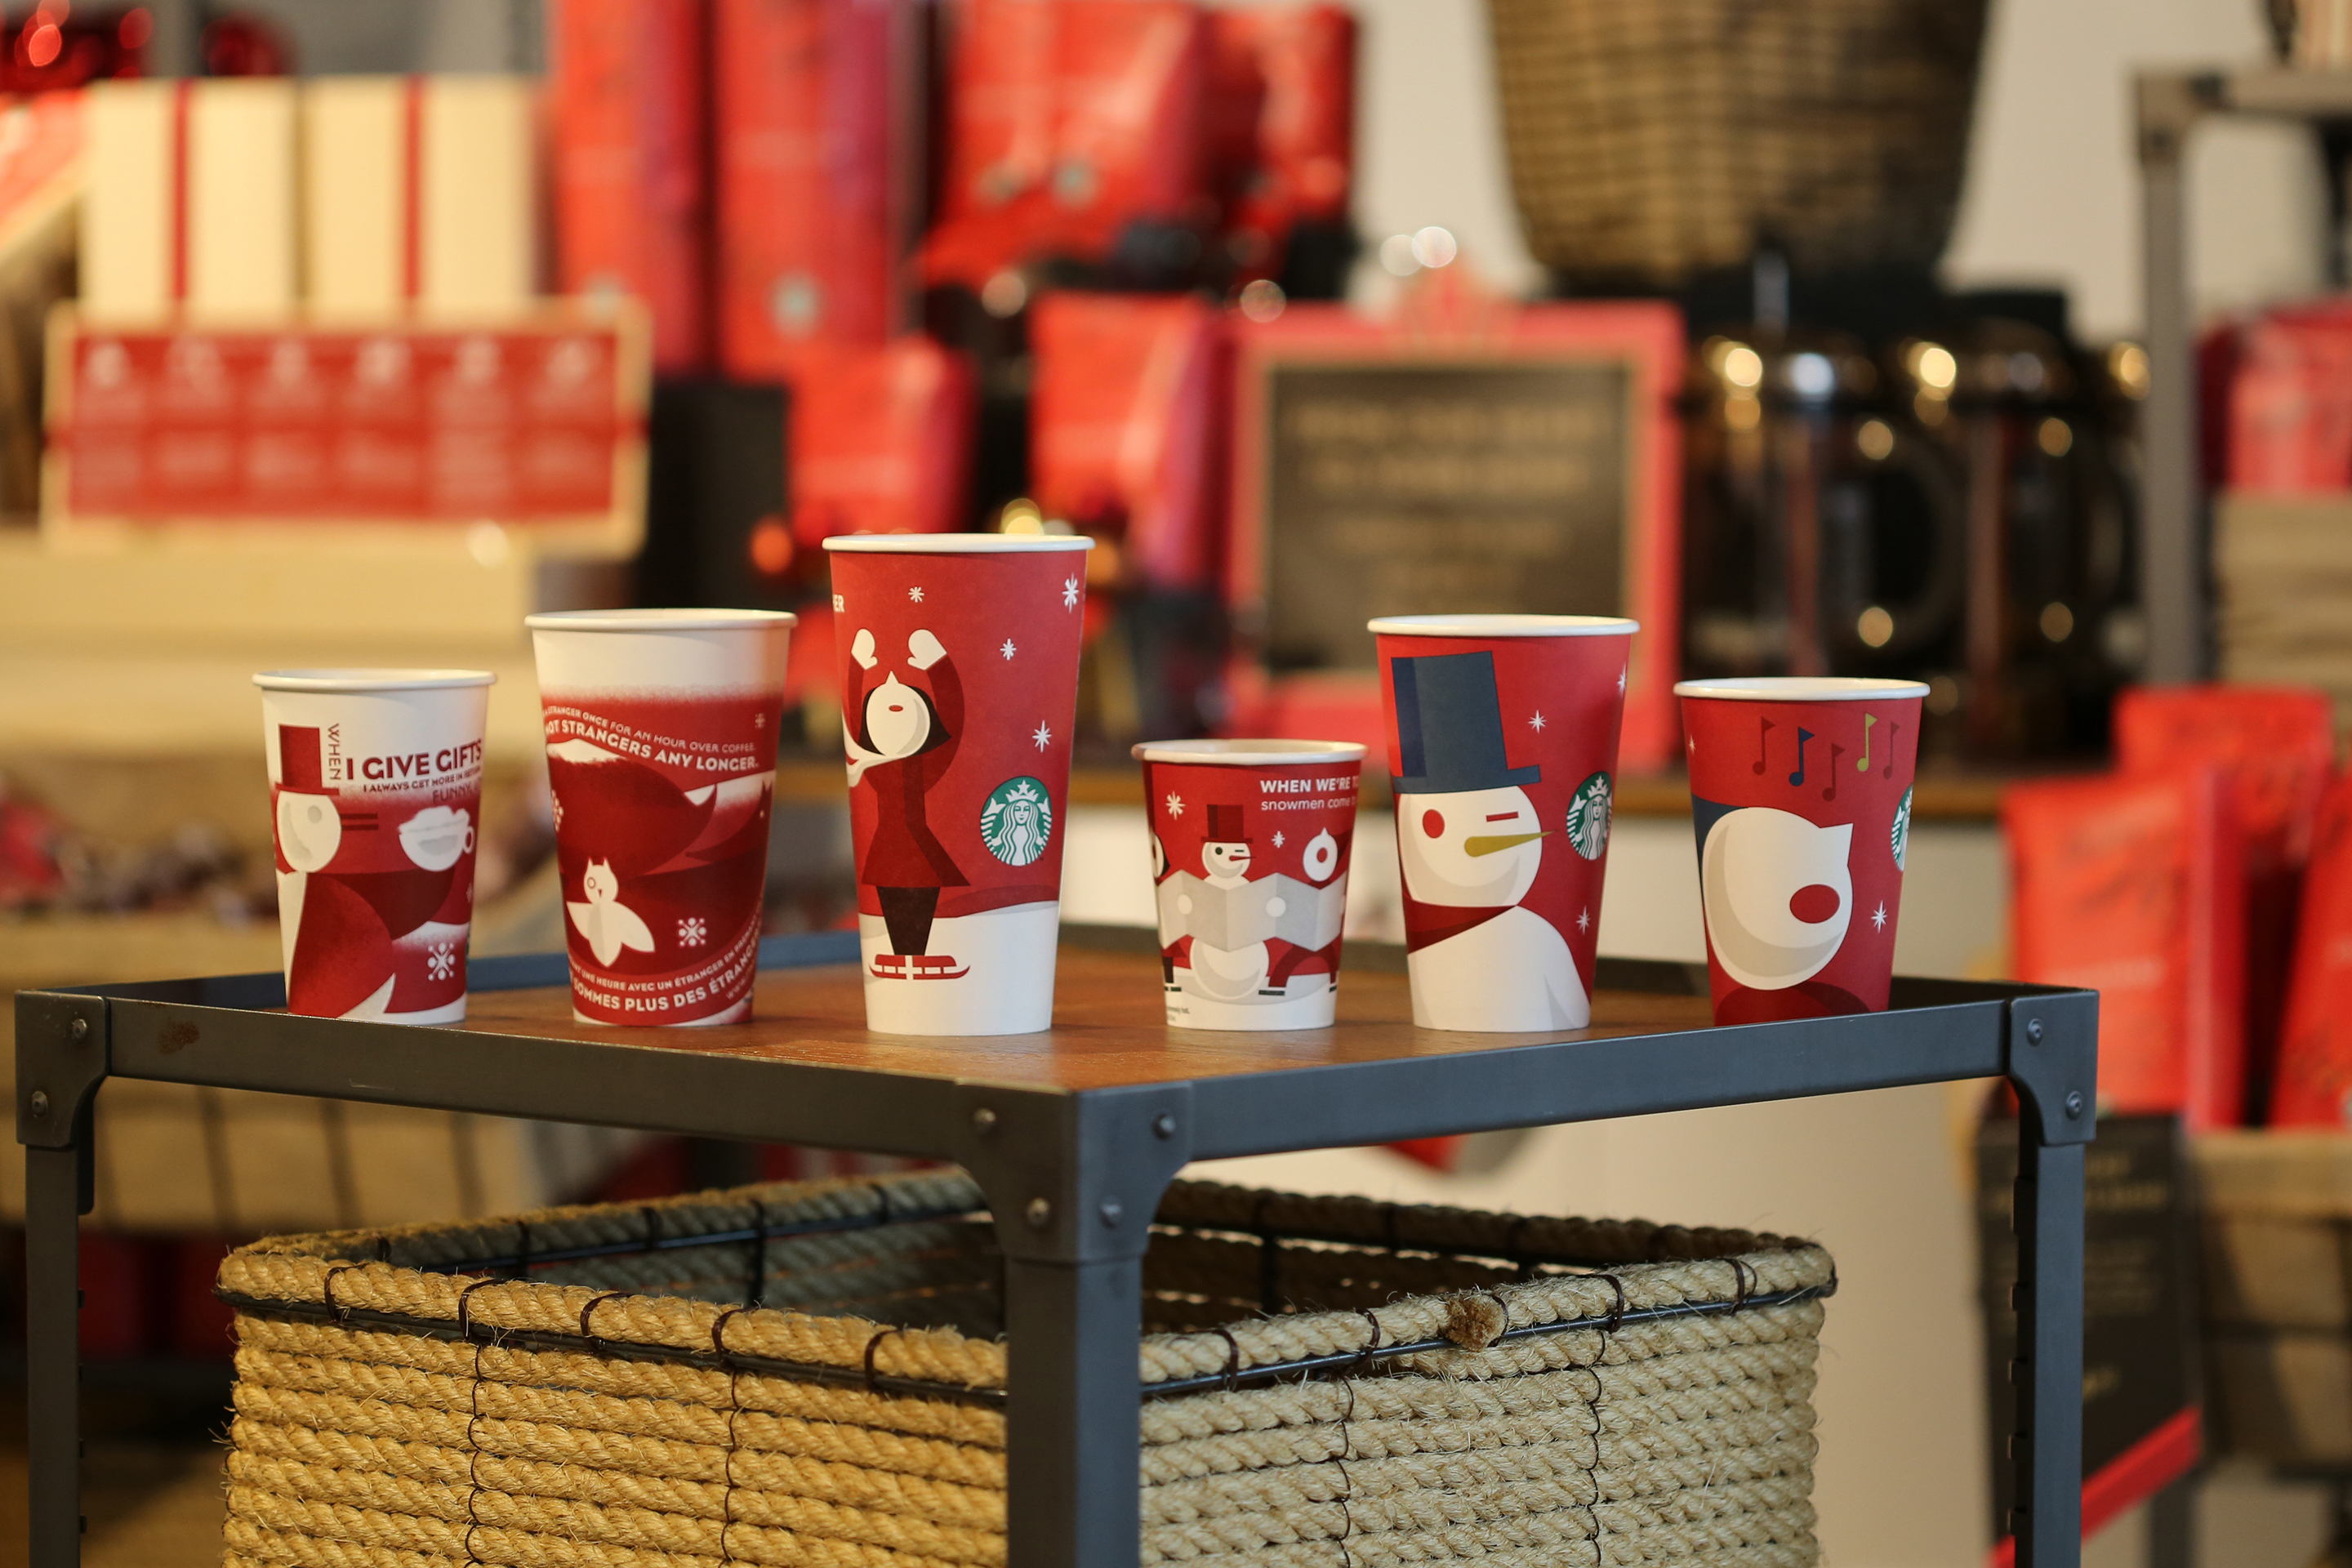 https://www.snopes.com/uploads/2015/11/Holiday_13Red_CupsYears_Past_Cups.jpg